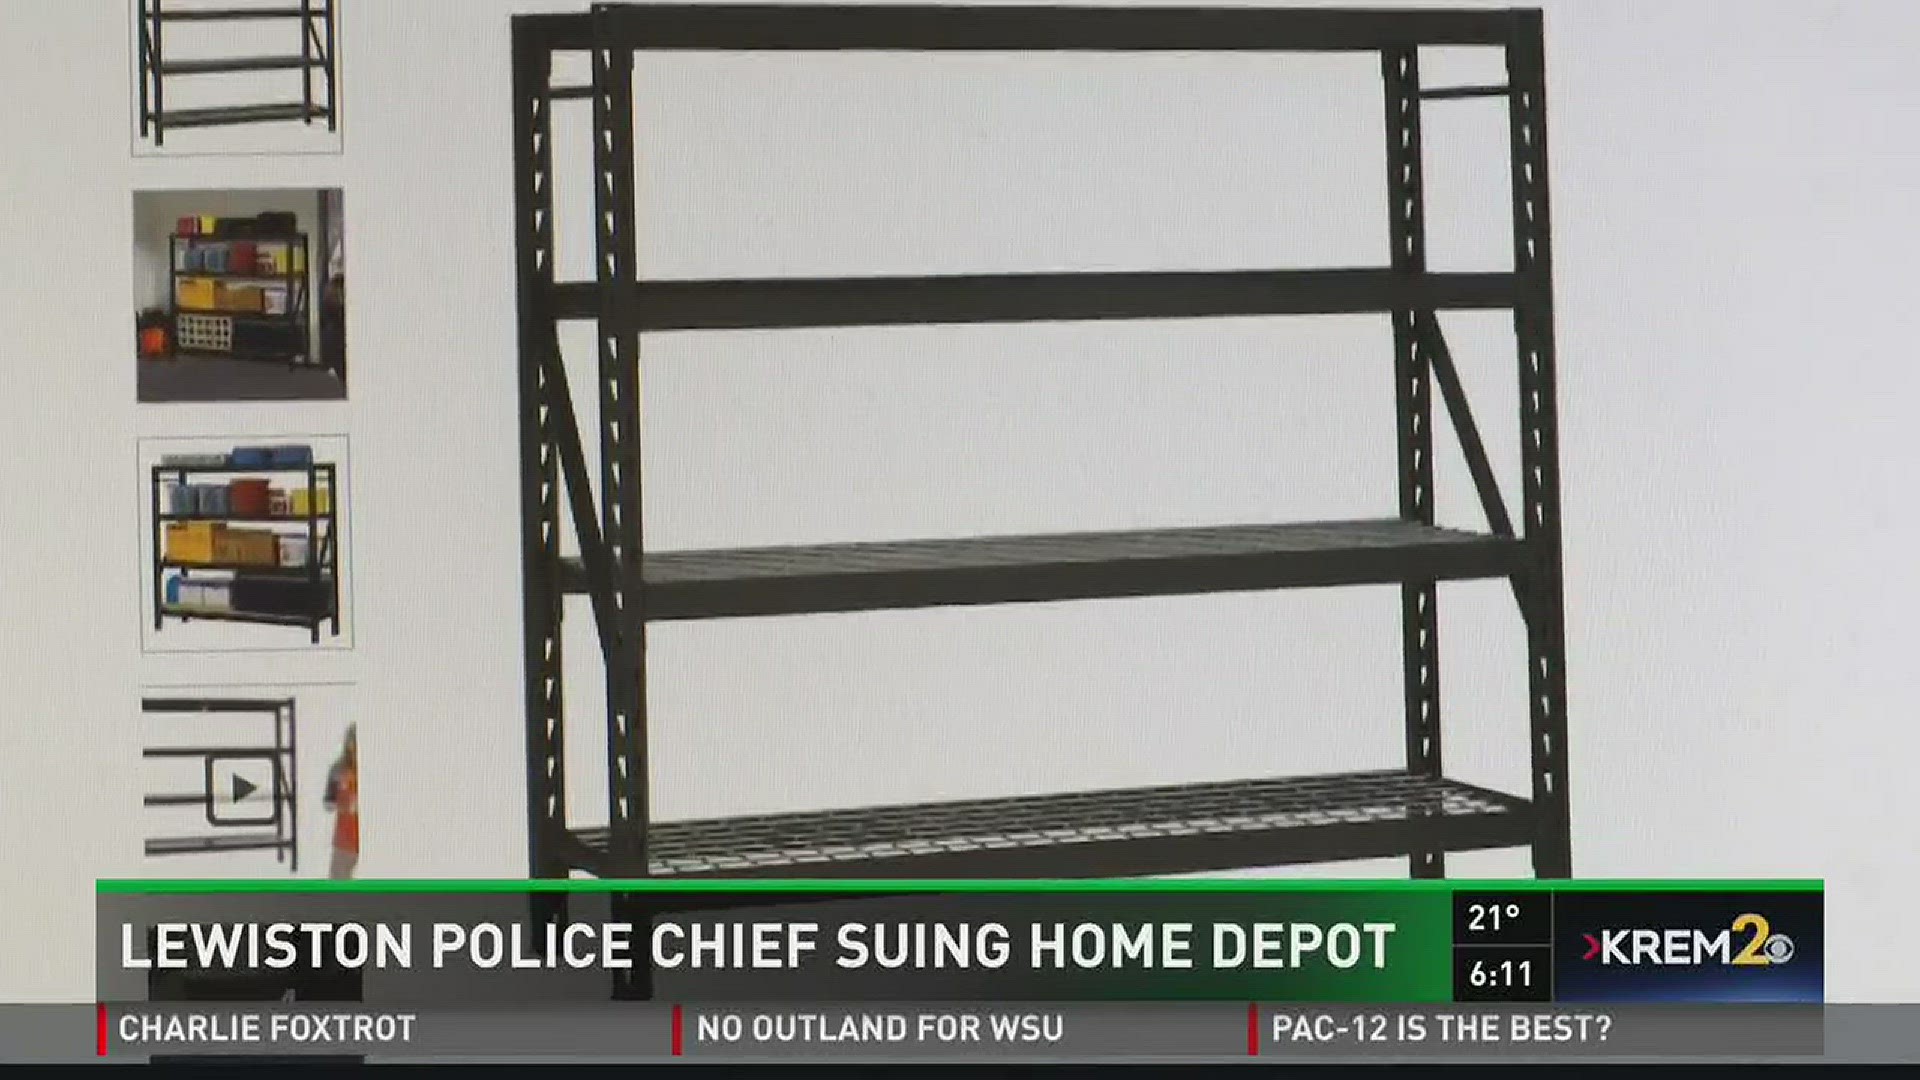 Lewiston Police Chief suing Home Depot